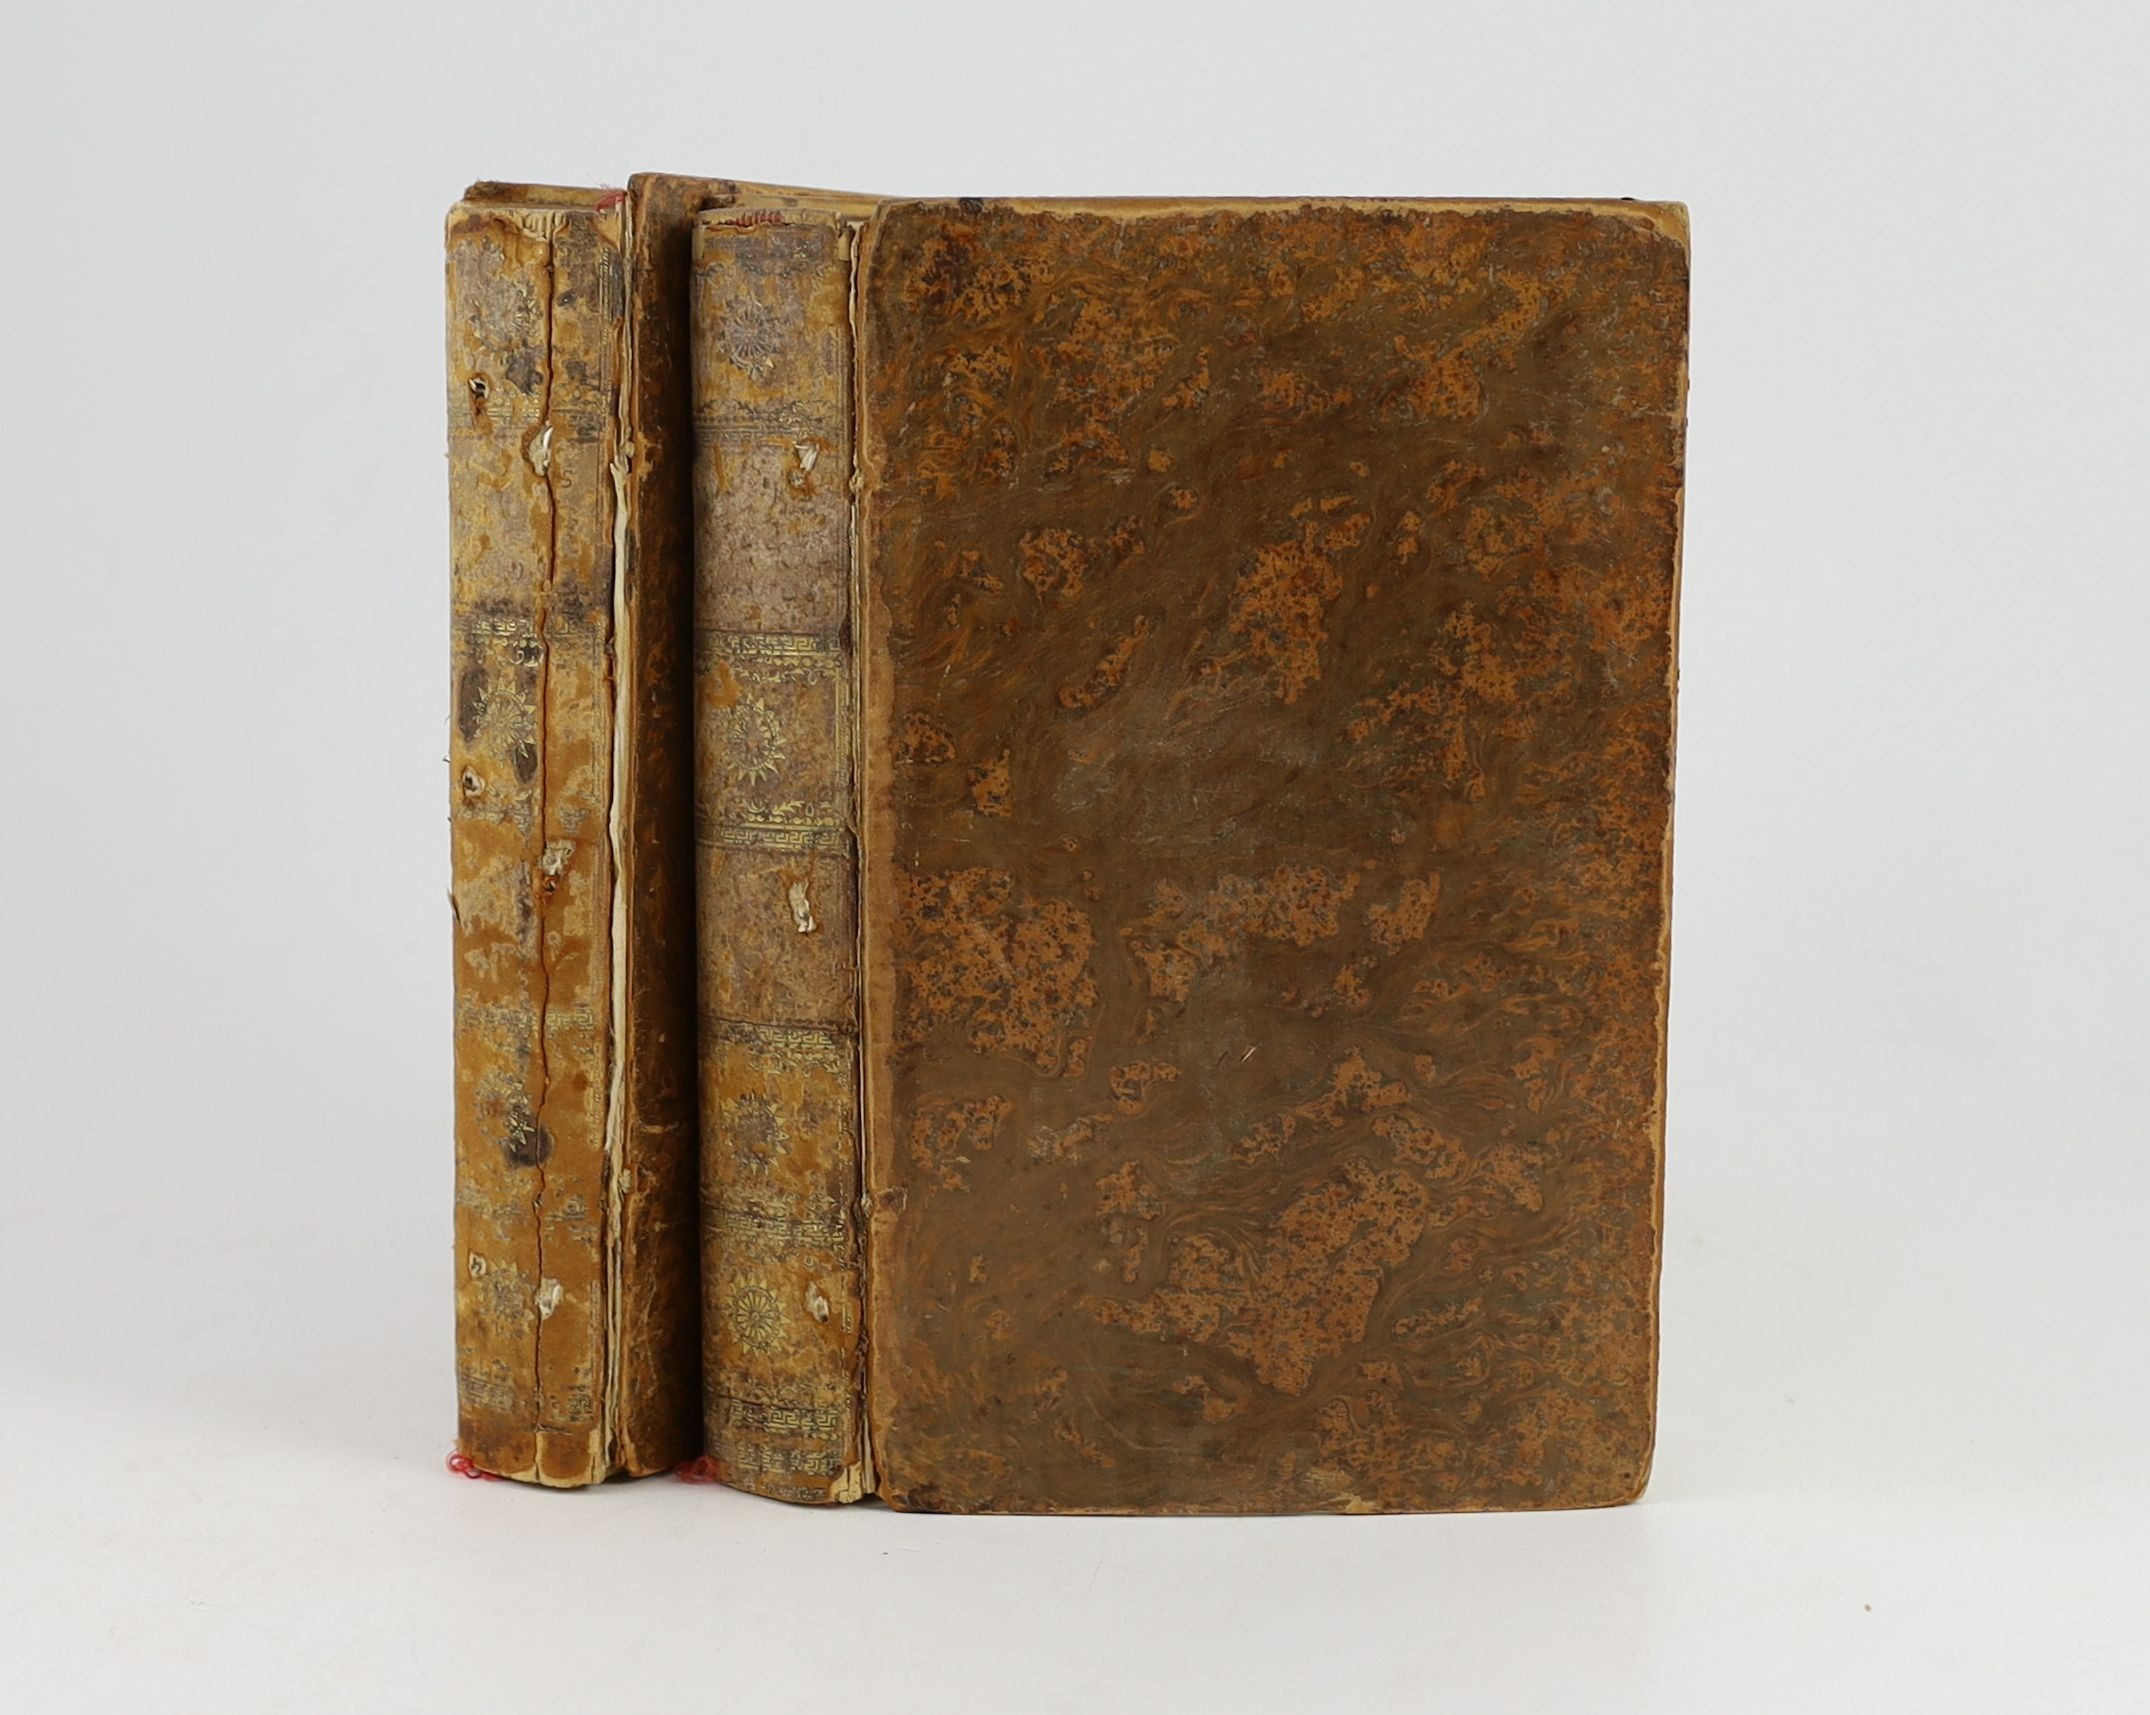 Smith, Adam - An Enquiry into the Nature and Causes of the Wealth of Nations, 8th edition, vols 1 & 2 only (of 3), 8vo, tree calf, London, 1796